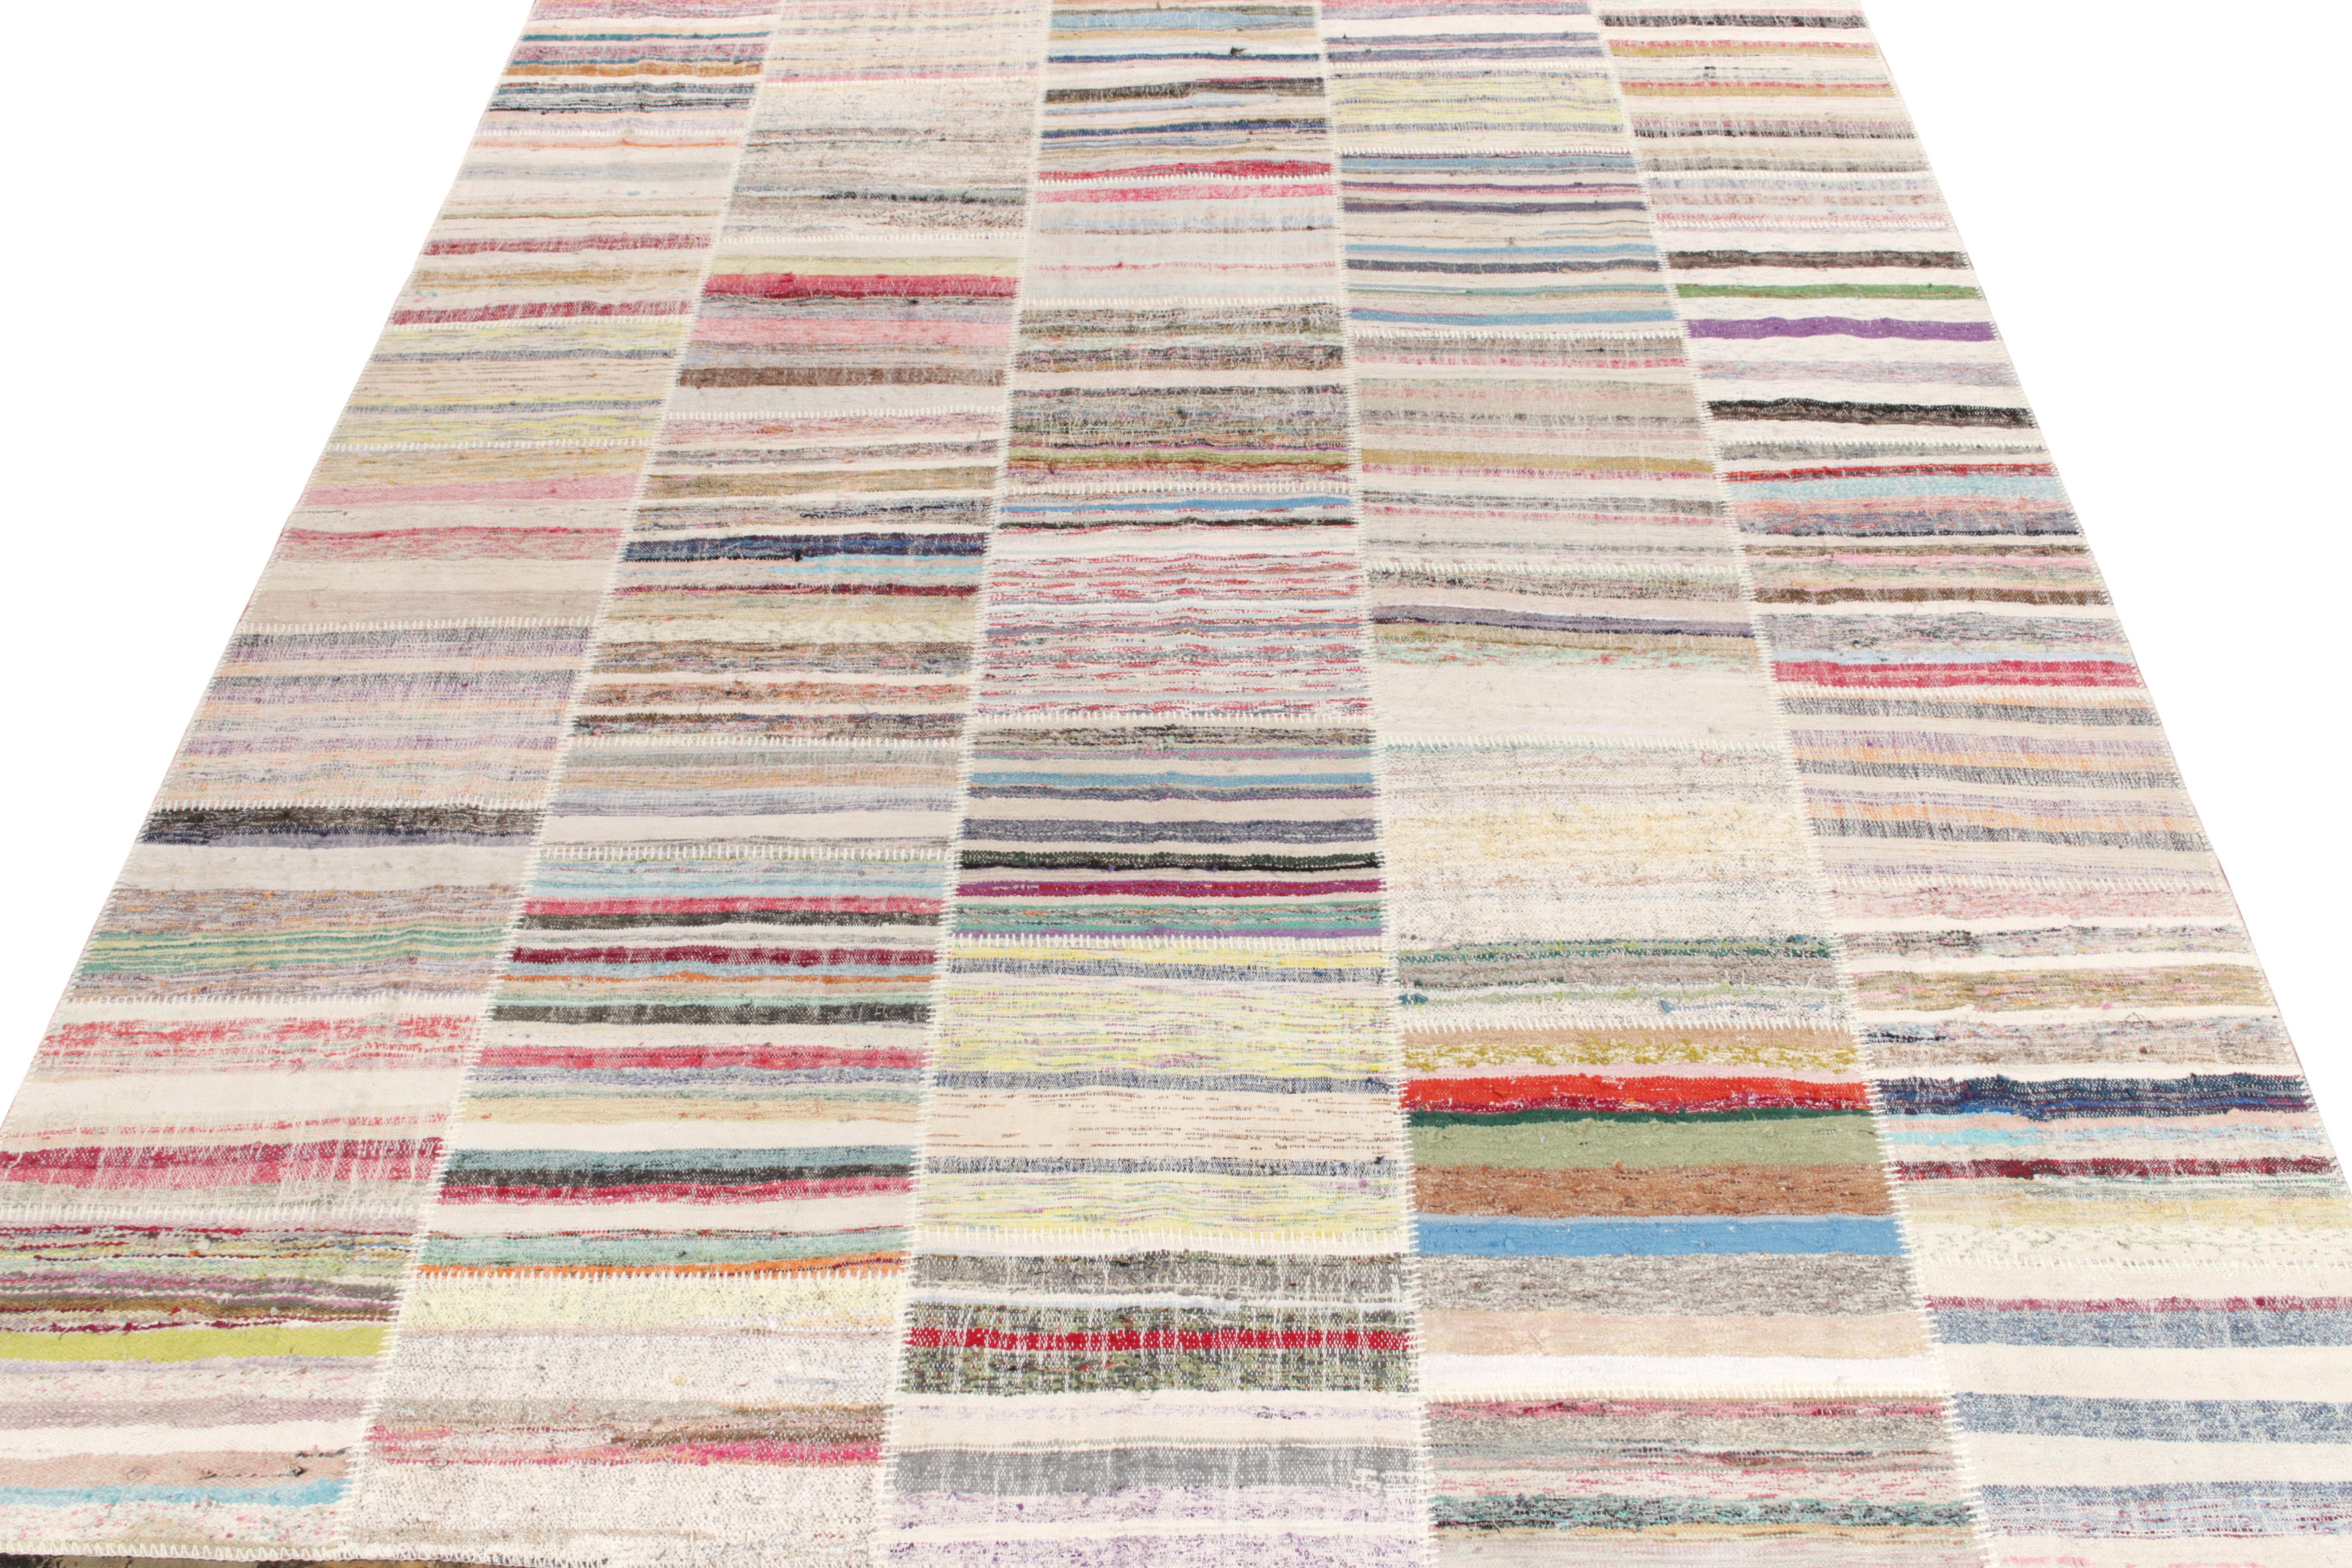 Rug & Kilim takes pride in presenting its artistic vision of patchwork kilim that reimagines vintage yarns into unique pieces of art. This 9 x 12 collectible features a striated pattern that lends a smooth sense of movement in variegated shades